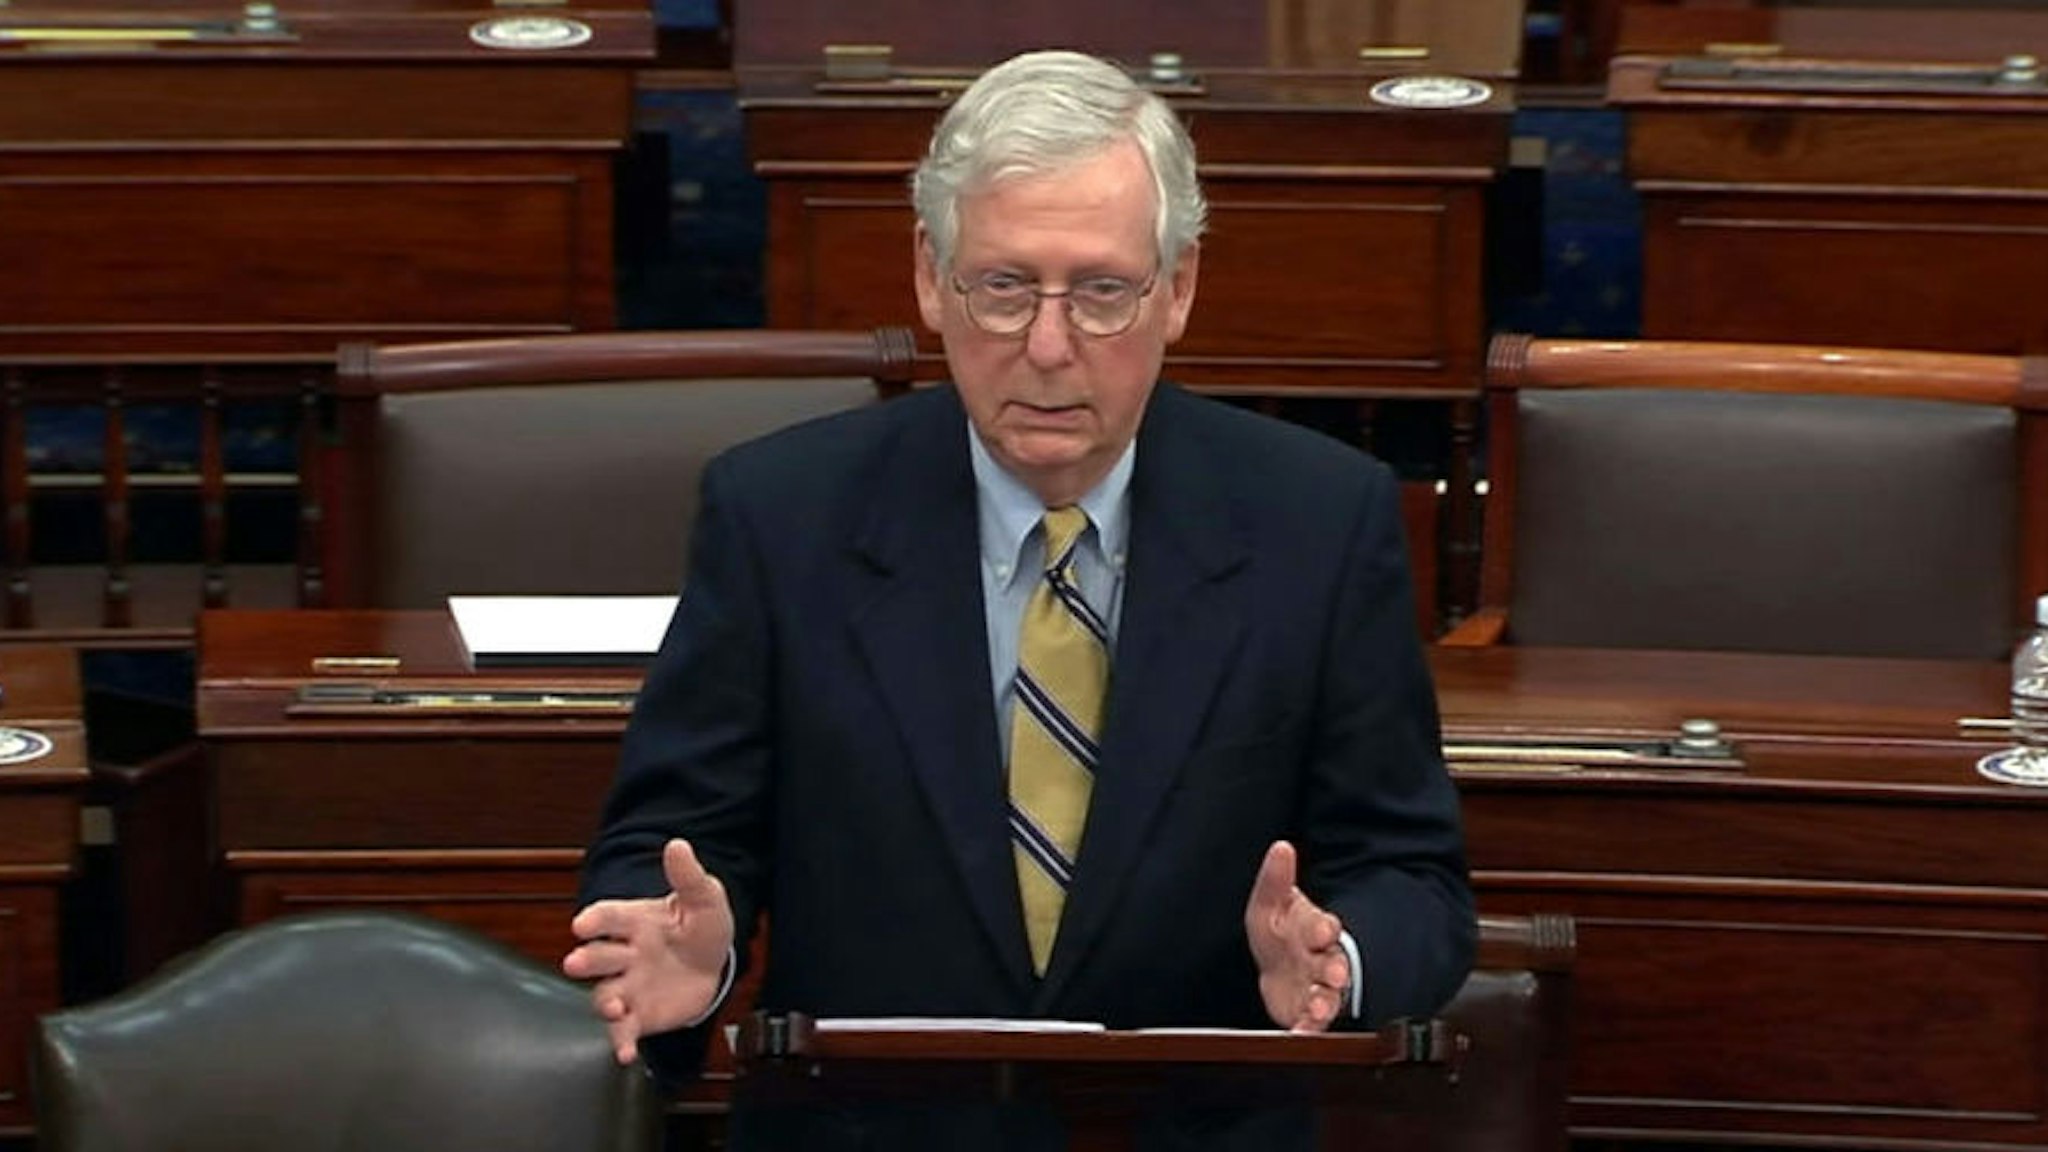 WASHINGTON, DC - FEBRUARY 13: In this screenshot taken from a congress.gov webcast, Minority leader Sen. Mitch McConnell (R-KY) responds after the Senate voted 57-43 to acquit on the fifth day of former President Donald Trump's second impeachment trial at the U.S. Capitol on February 13, 2021 in Washington, DC. House impeachment managers had argued that Trump was “singularly responsible” for the January 6th attack at the U.S. Capitol and he should be convicted and barred from ever holding public office again.